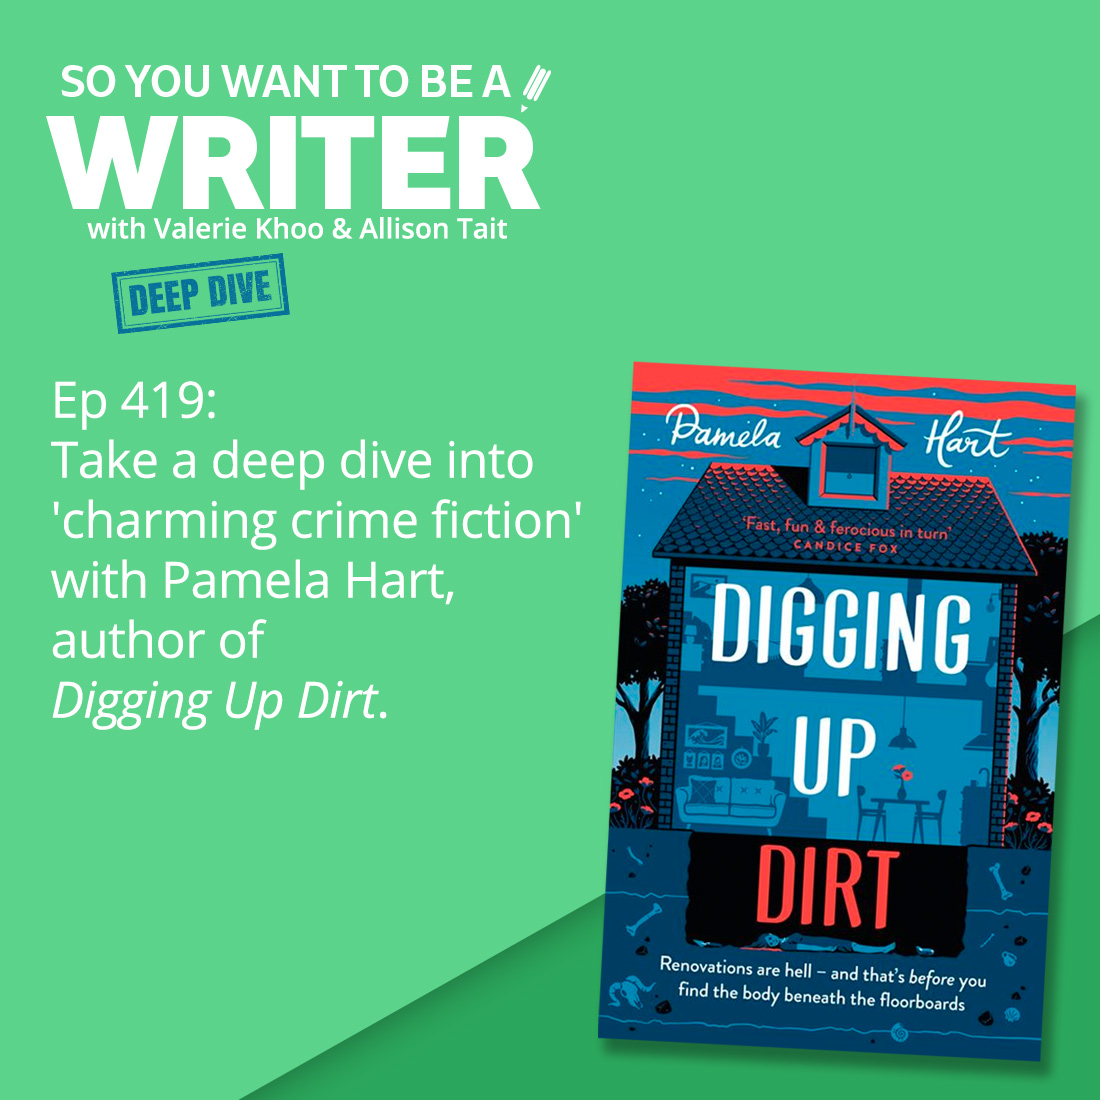 WRITER 419: Take a deep dive into 'charming crime fiction' with Pamela Hart, author of 'Digging Up Dirt'.